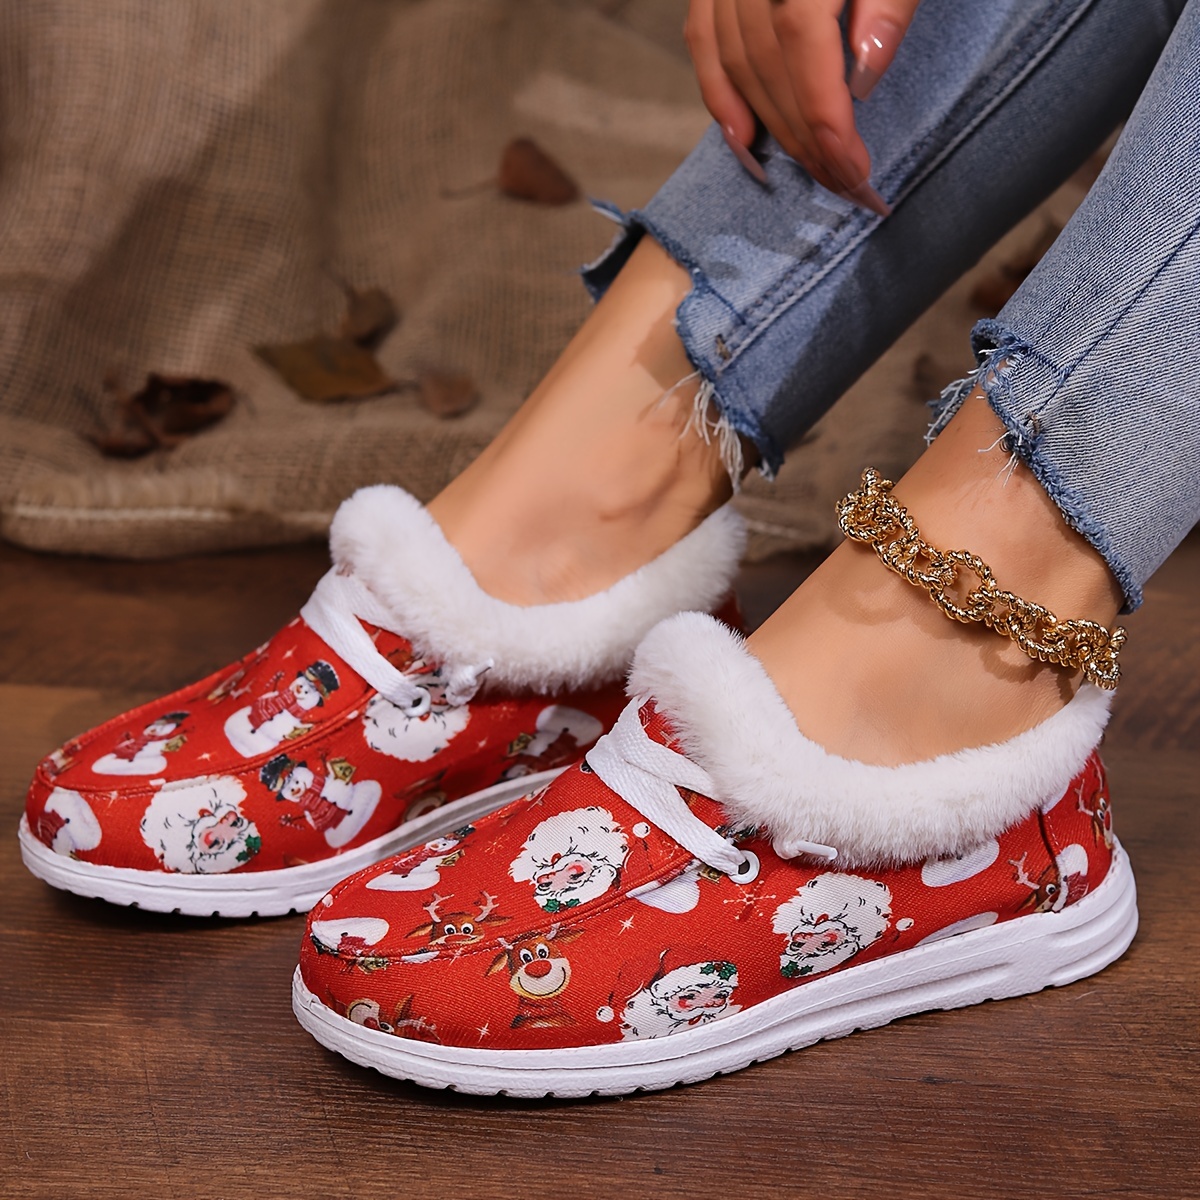 Women's Fashion Christmas Style Snow Boots, The Upper Is Decorated With ...